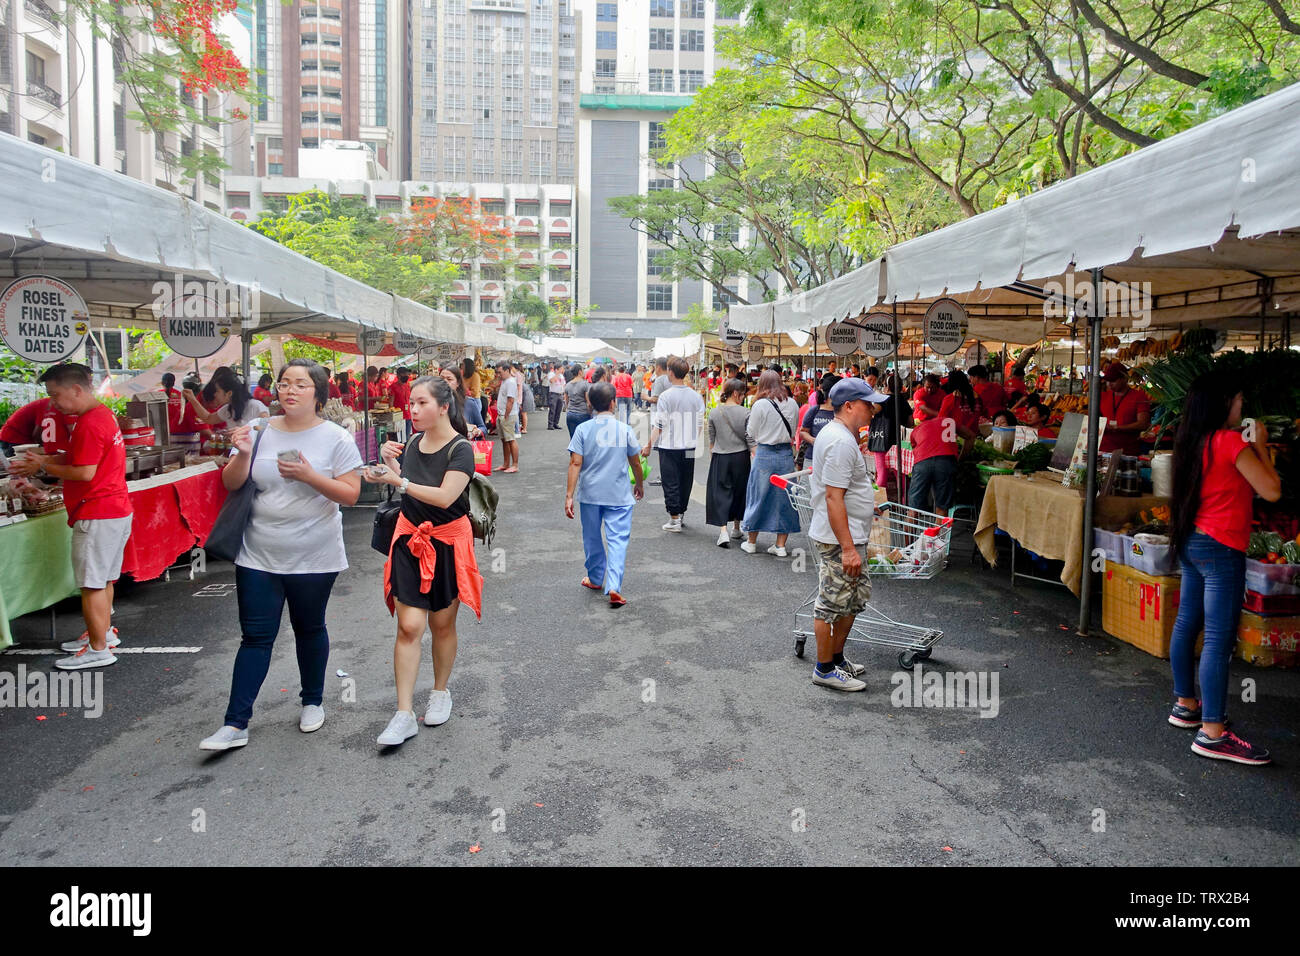 This Saturday market in an urban jungle has become a popular spot for the variety of international cuisines as well as the fresh produce. Stock Photo